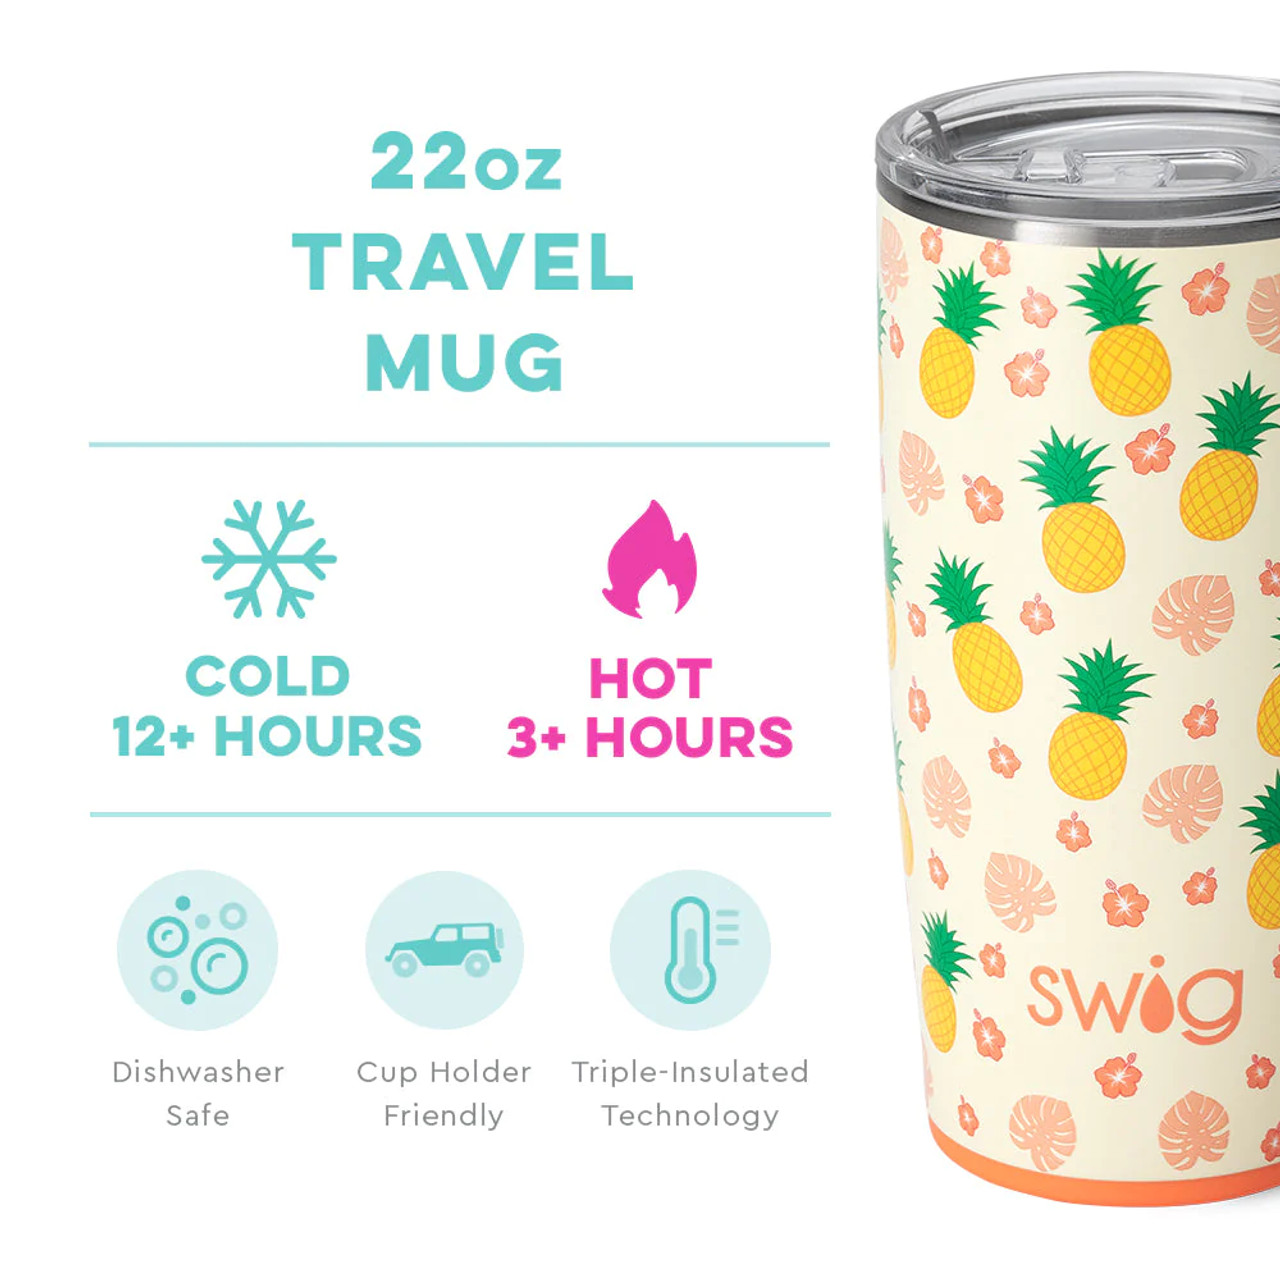 https://cdn11.bigcommerce.com/s-e3nb6xi/images/stencil/1280x1280/products/25257/127018/swig-life-signature-22oz-insulated-stainless-steel-travel-mug-pineapple-temp-info__74959.1689105503.jpg?c=2